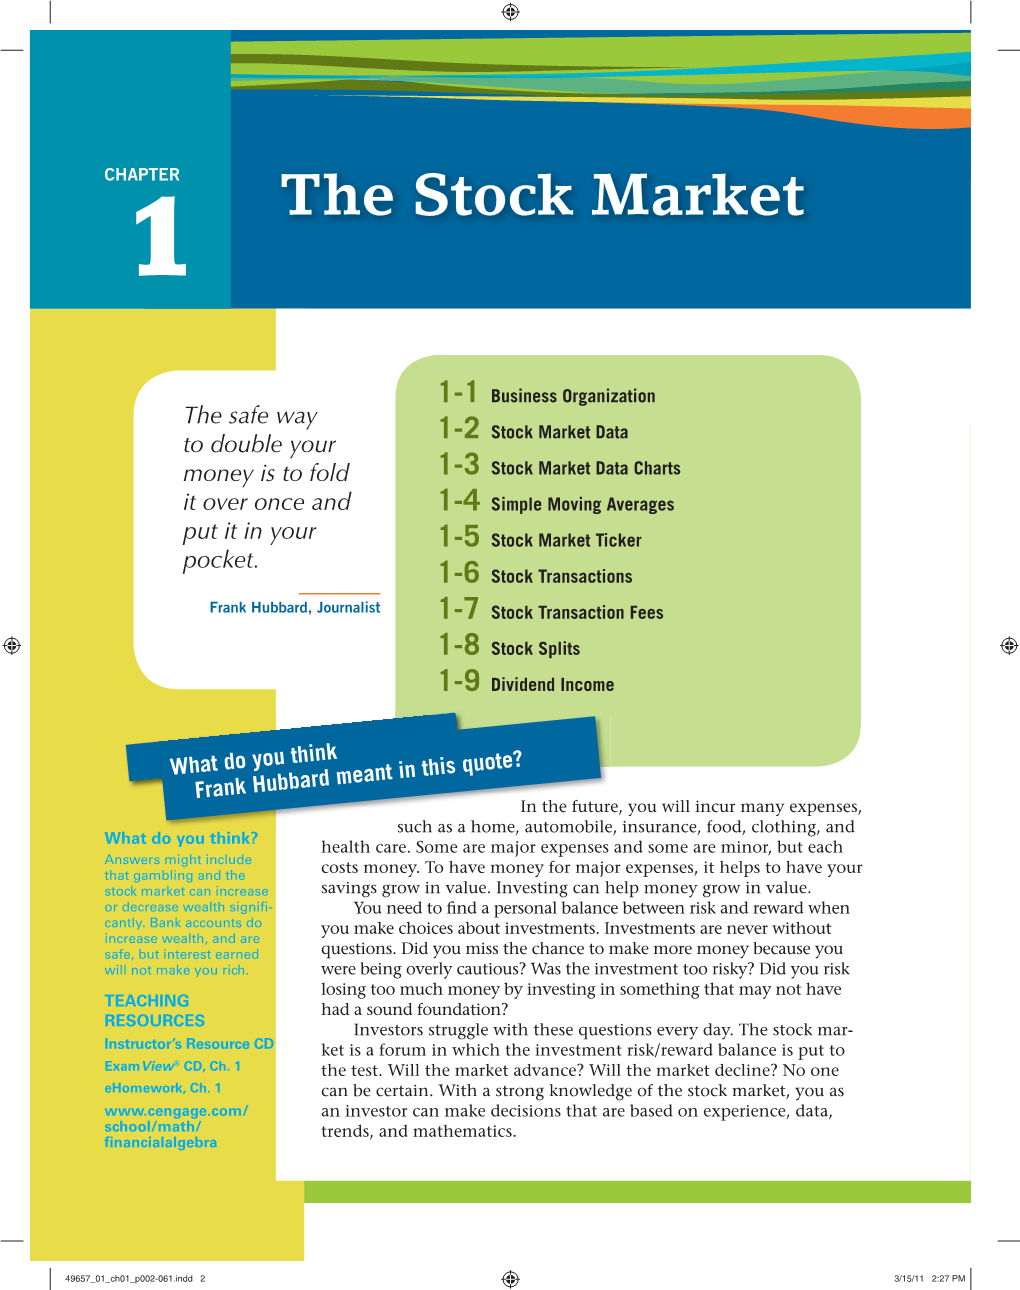 The Stock Market, You As an Investor Can Make Decisions That Are Based on Experience, Data, School/Math/ Trends, and Mathematics